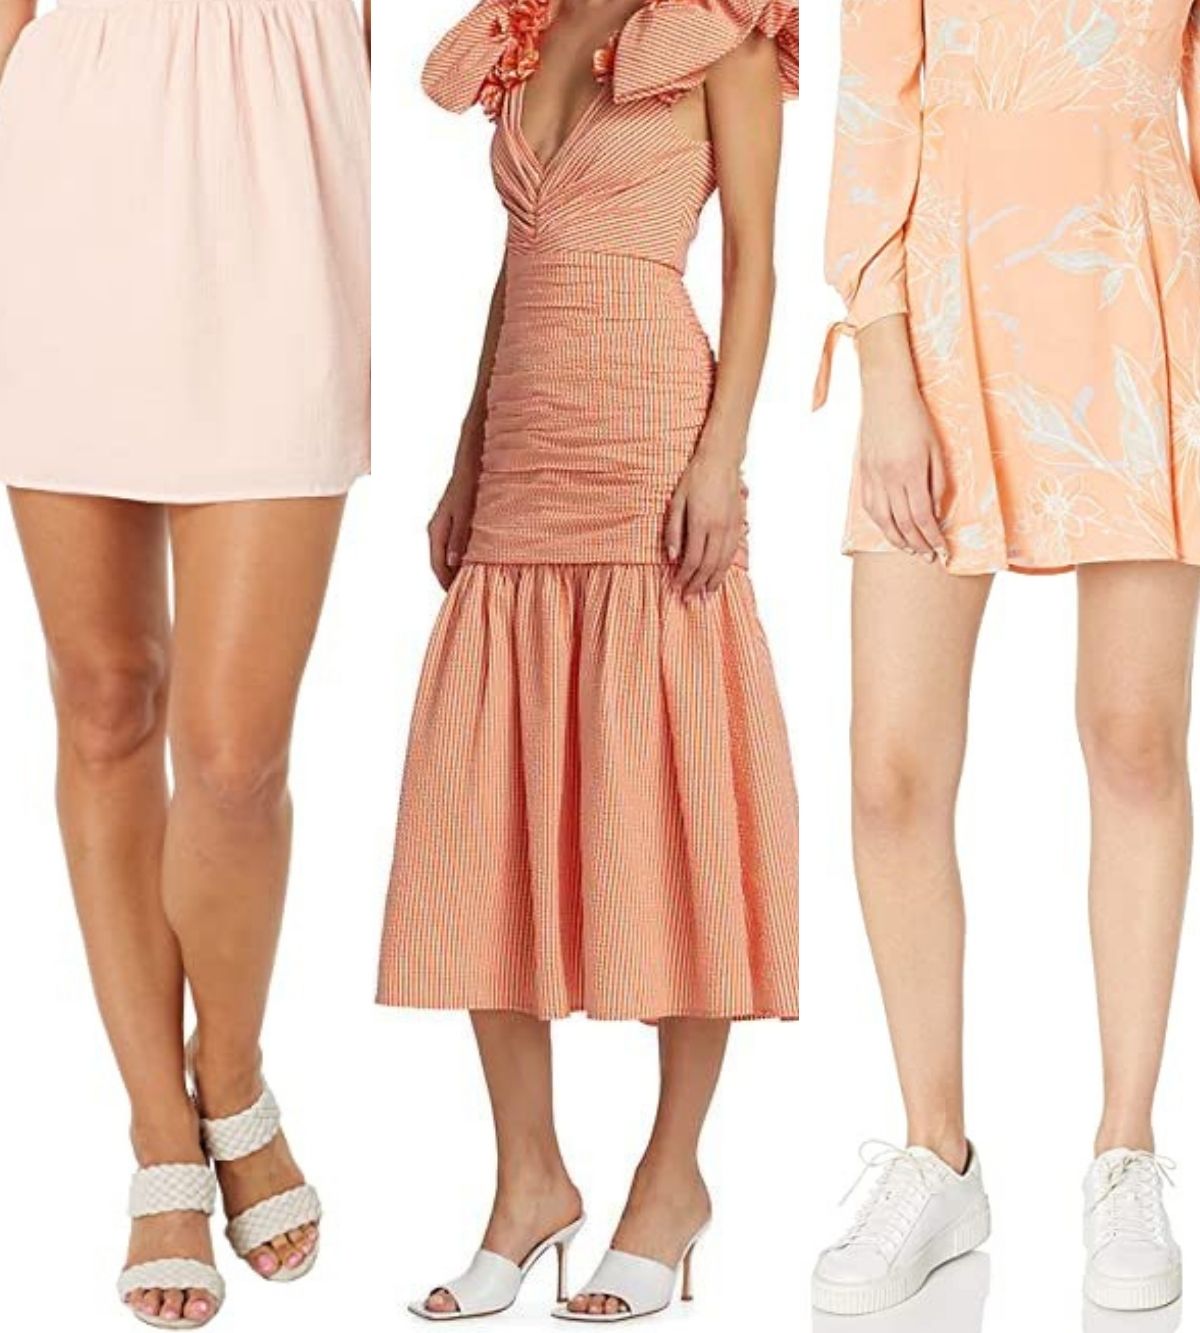 Best Color Shoes To Go With Peach Dresses Outfits A Color Guide | Hot ...